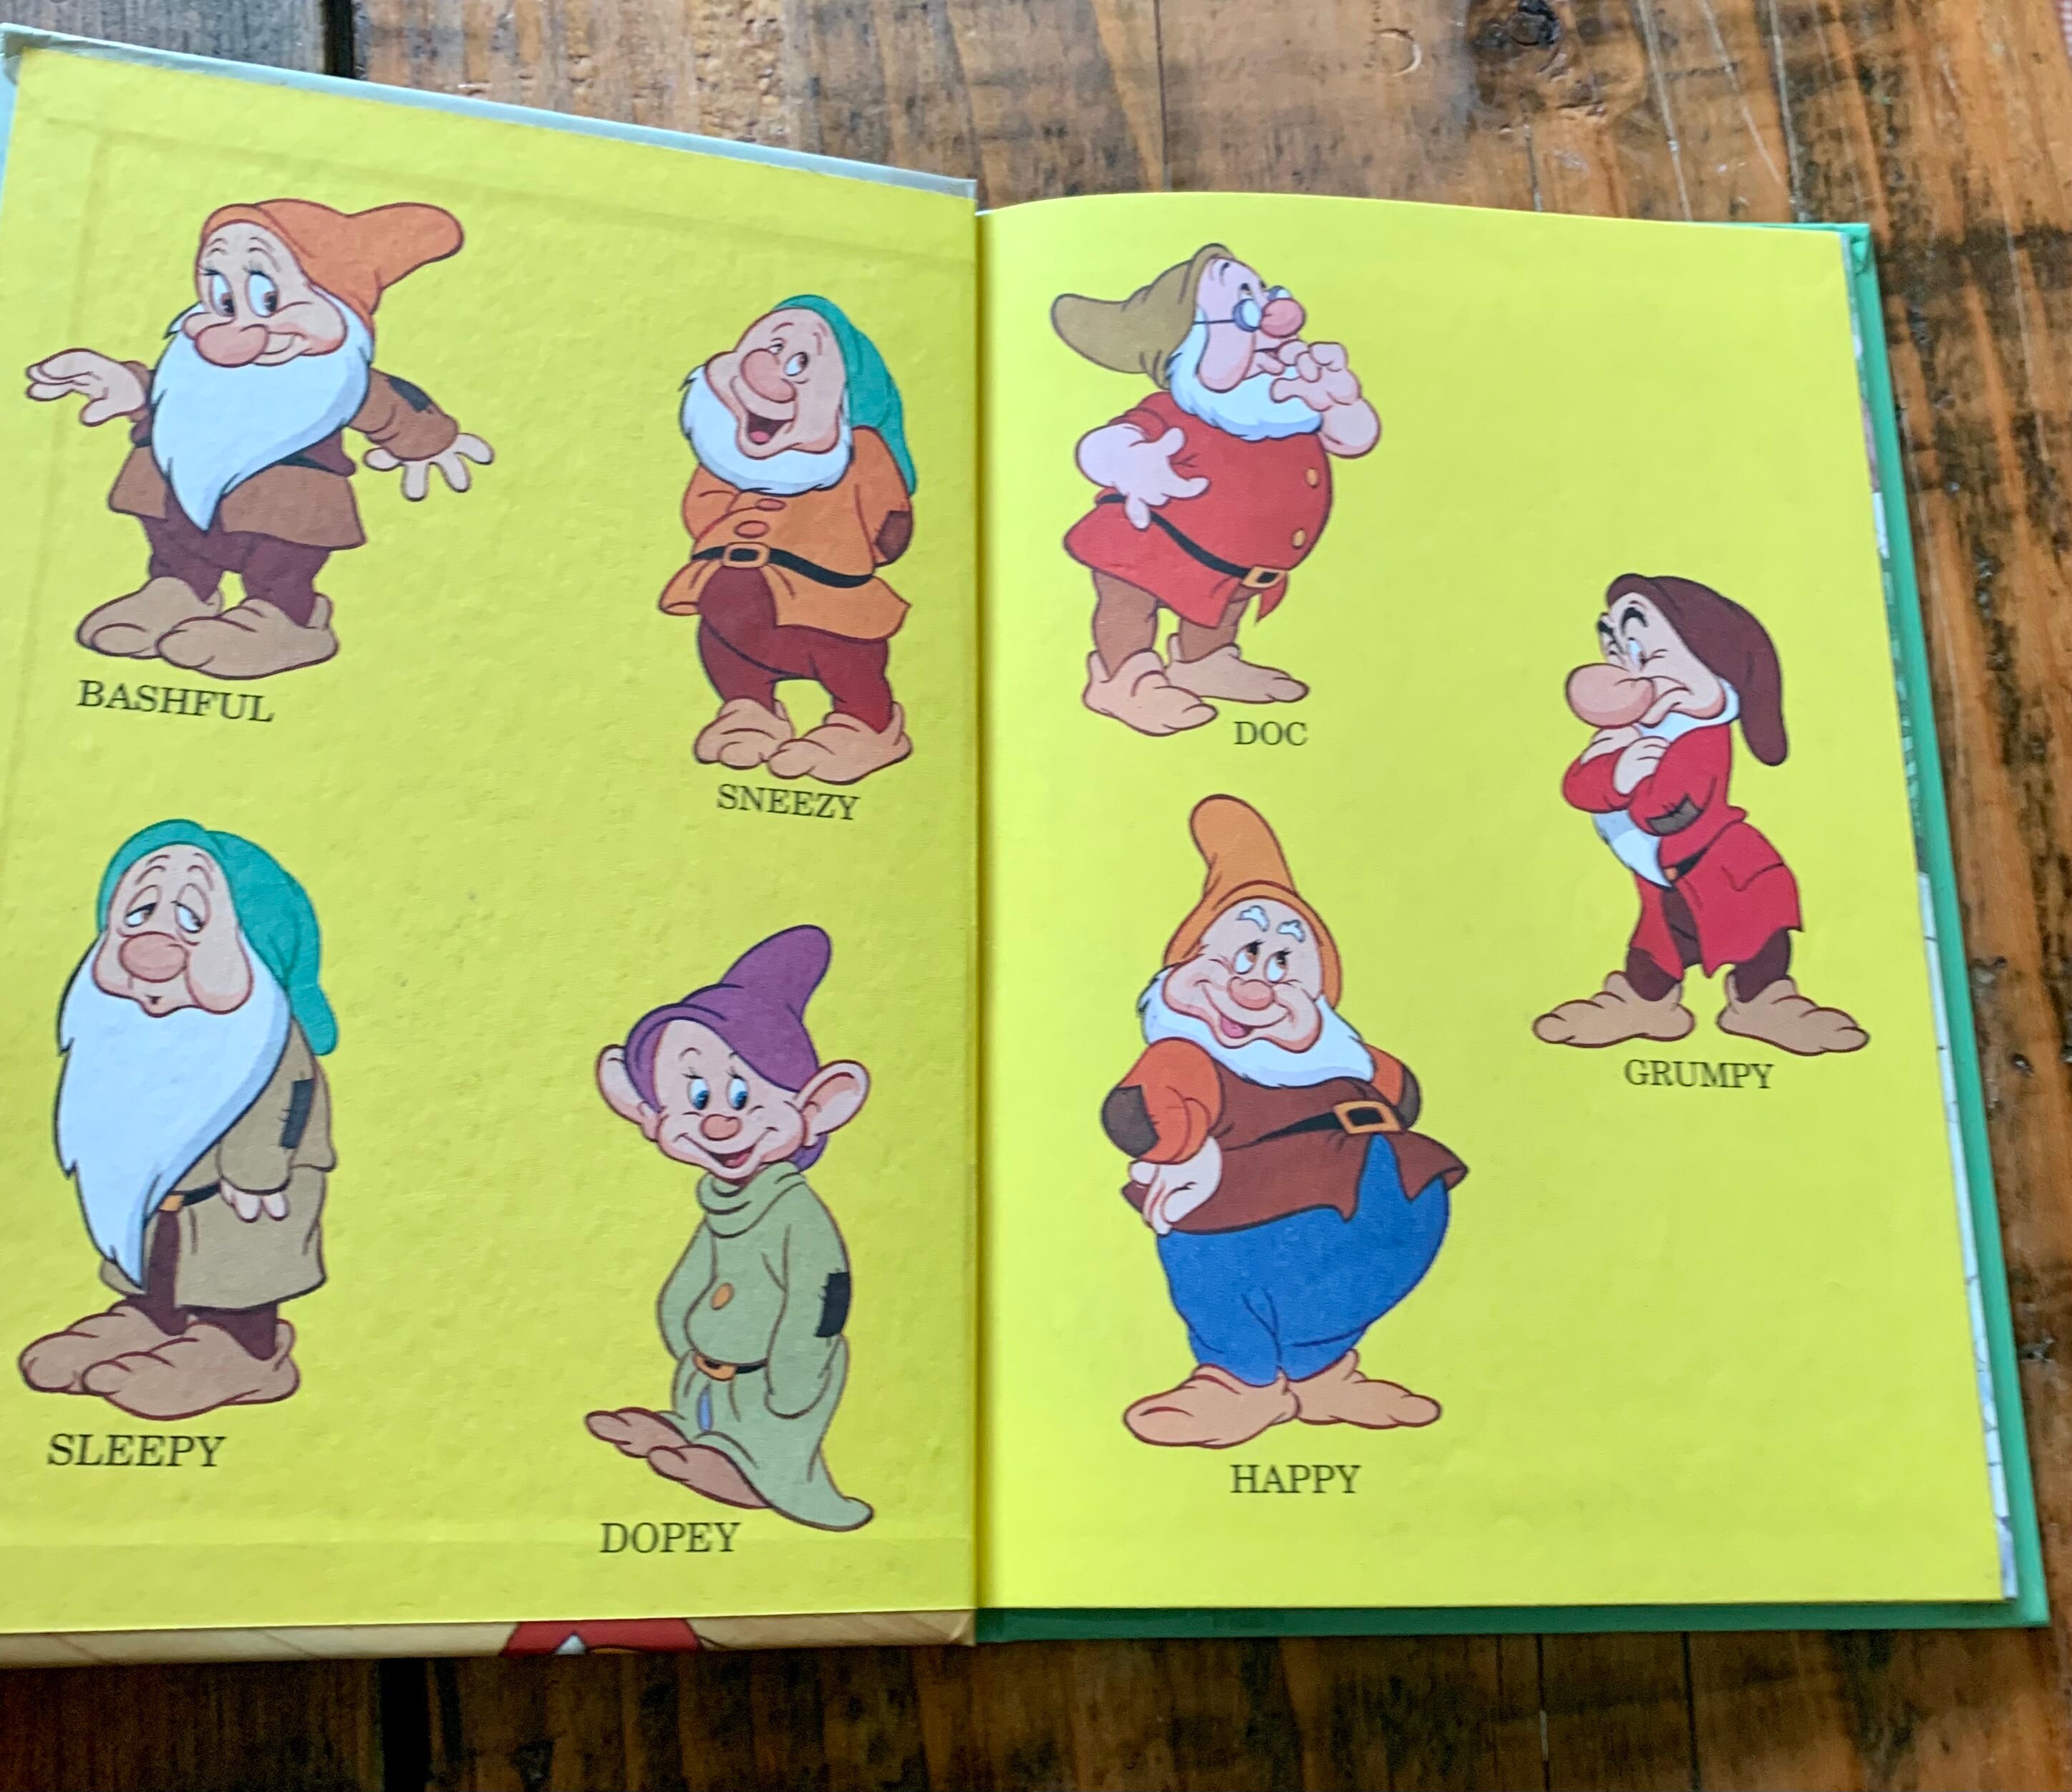 Walt Disney's Snow White and the Seven Dwarfs 1994 first edition